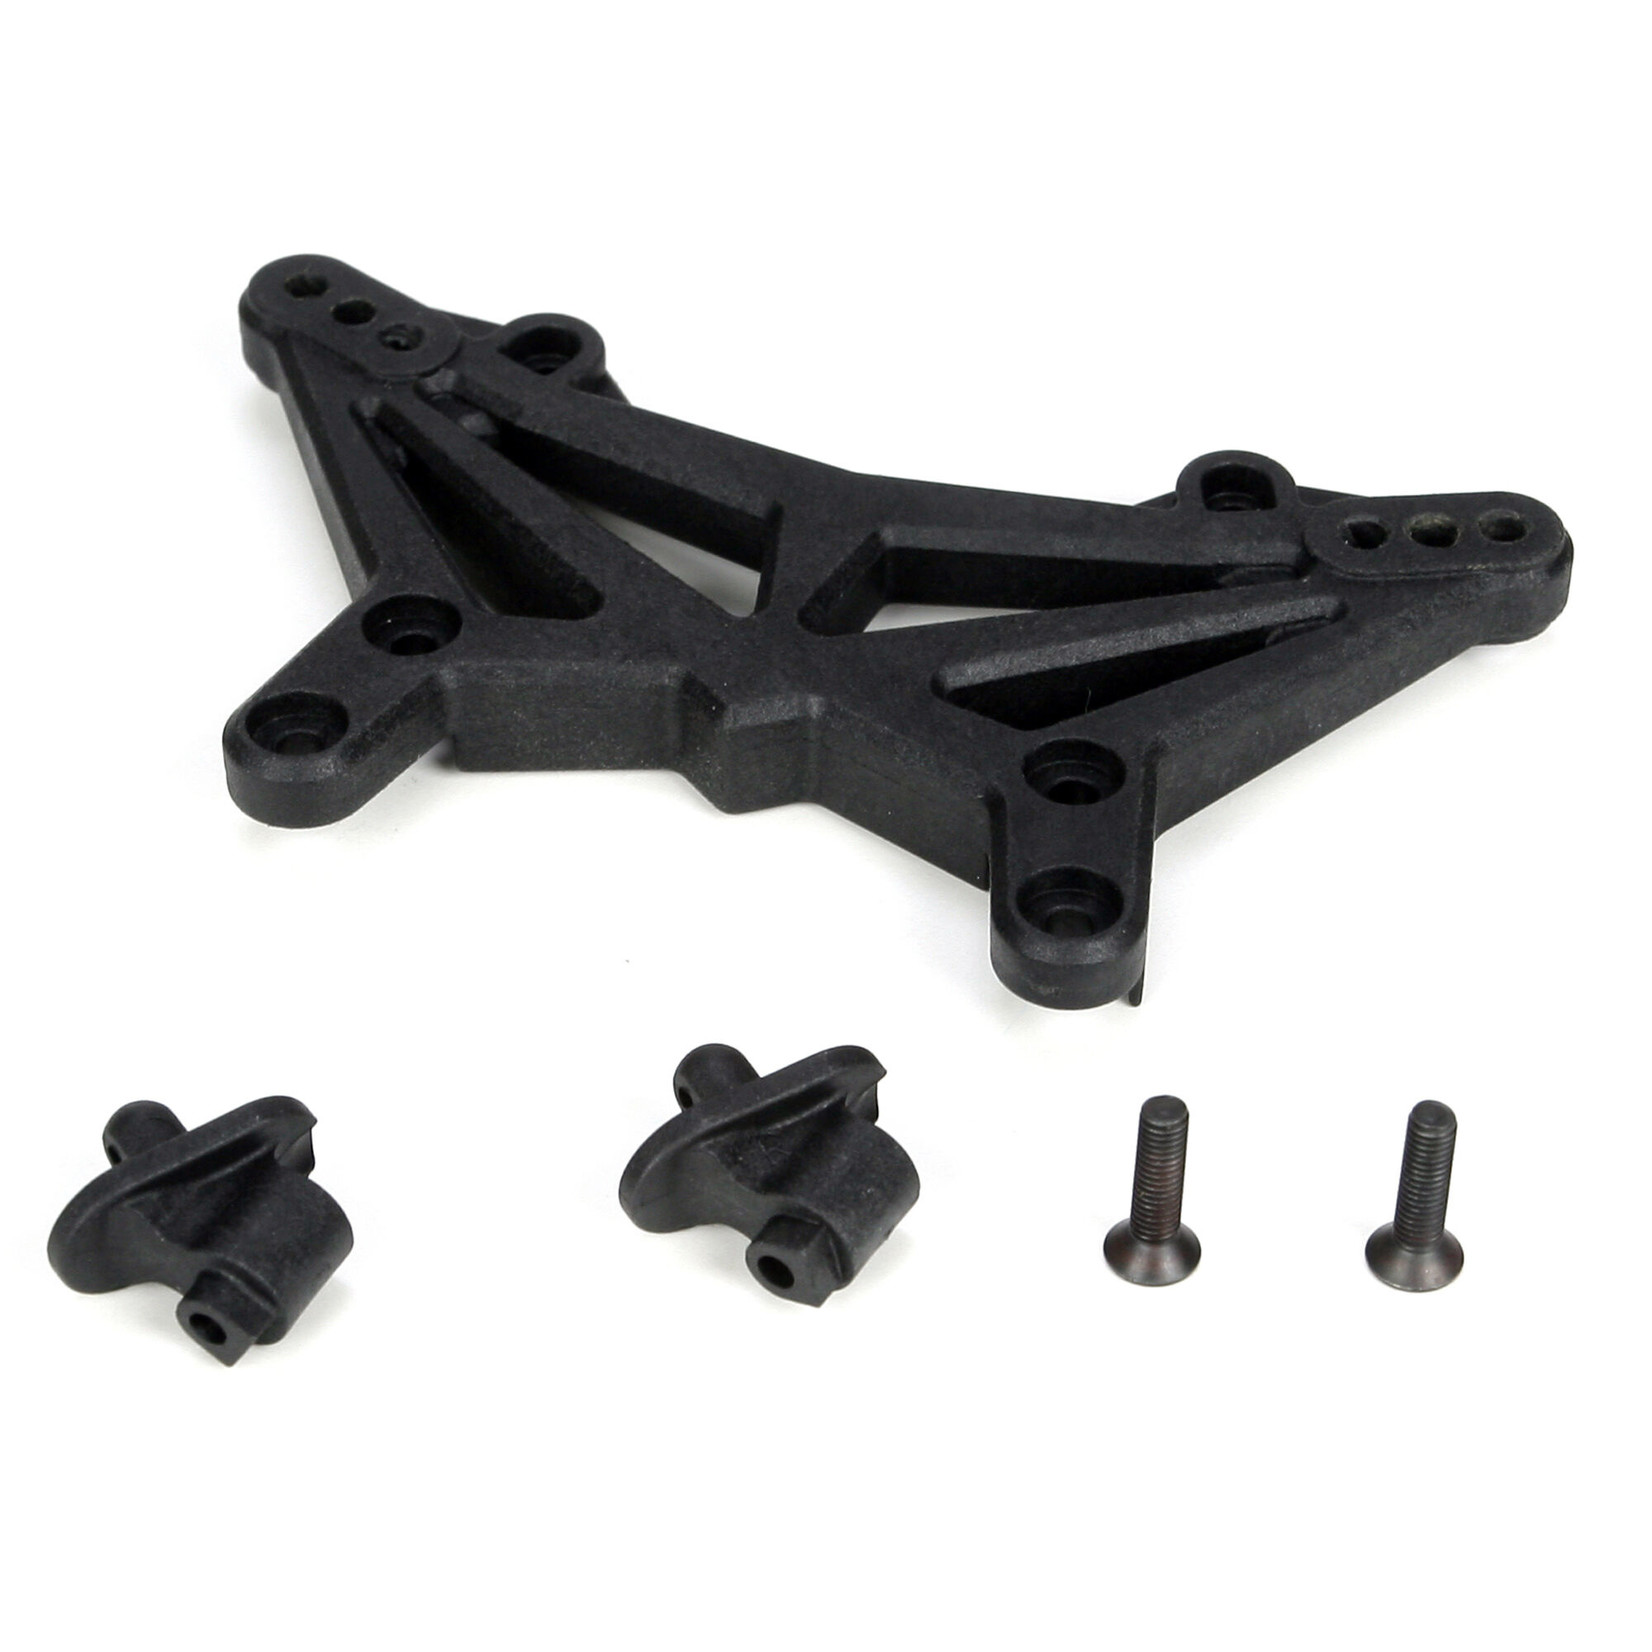 Team Losi Racing (TLR) Shock Tower & Body Mounts, Front: 22T